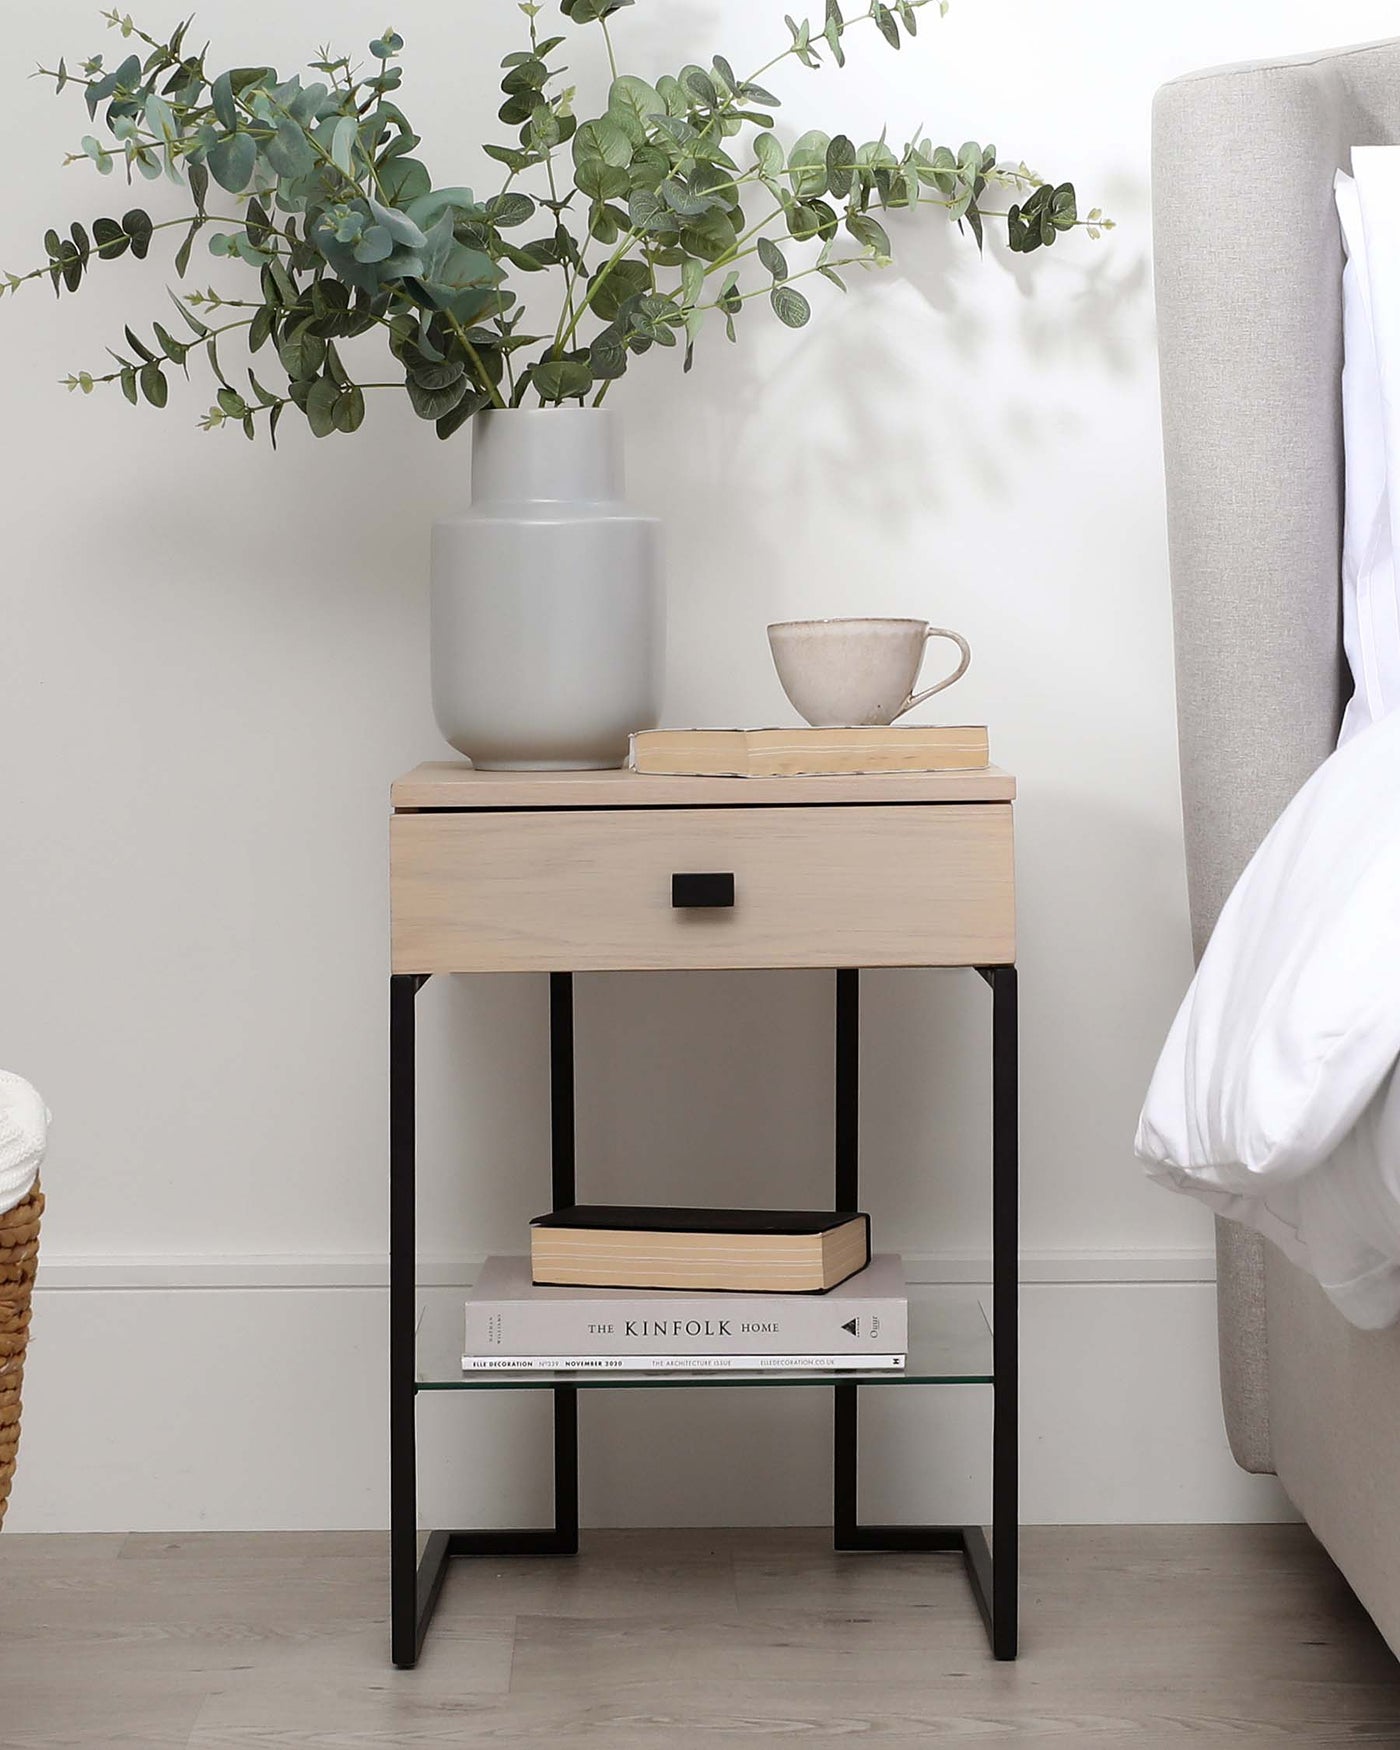 Modern minimalist bedside table with a light wood finish, a single drawer featuring a black pull handle, and a lower shelf supported by a sleek black metal frame.